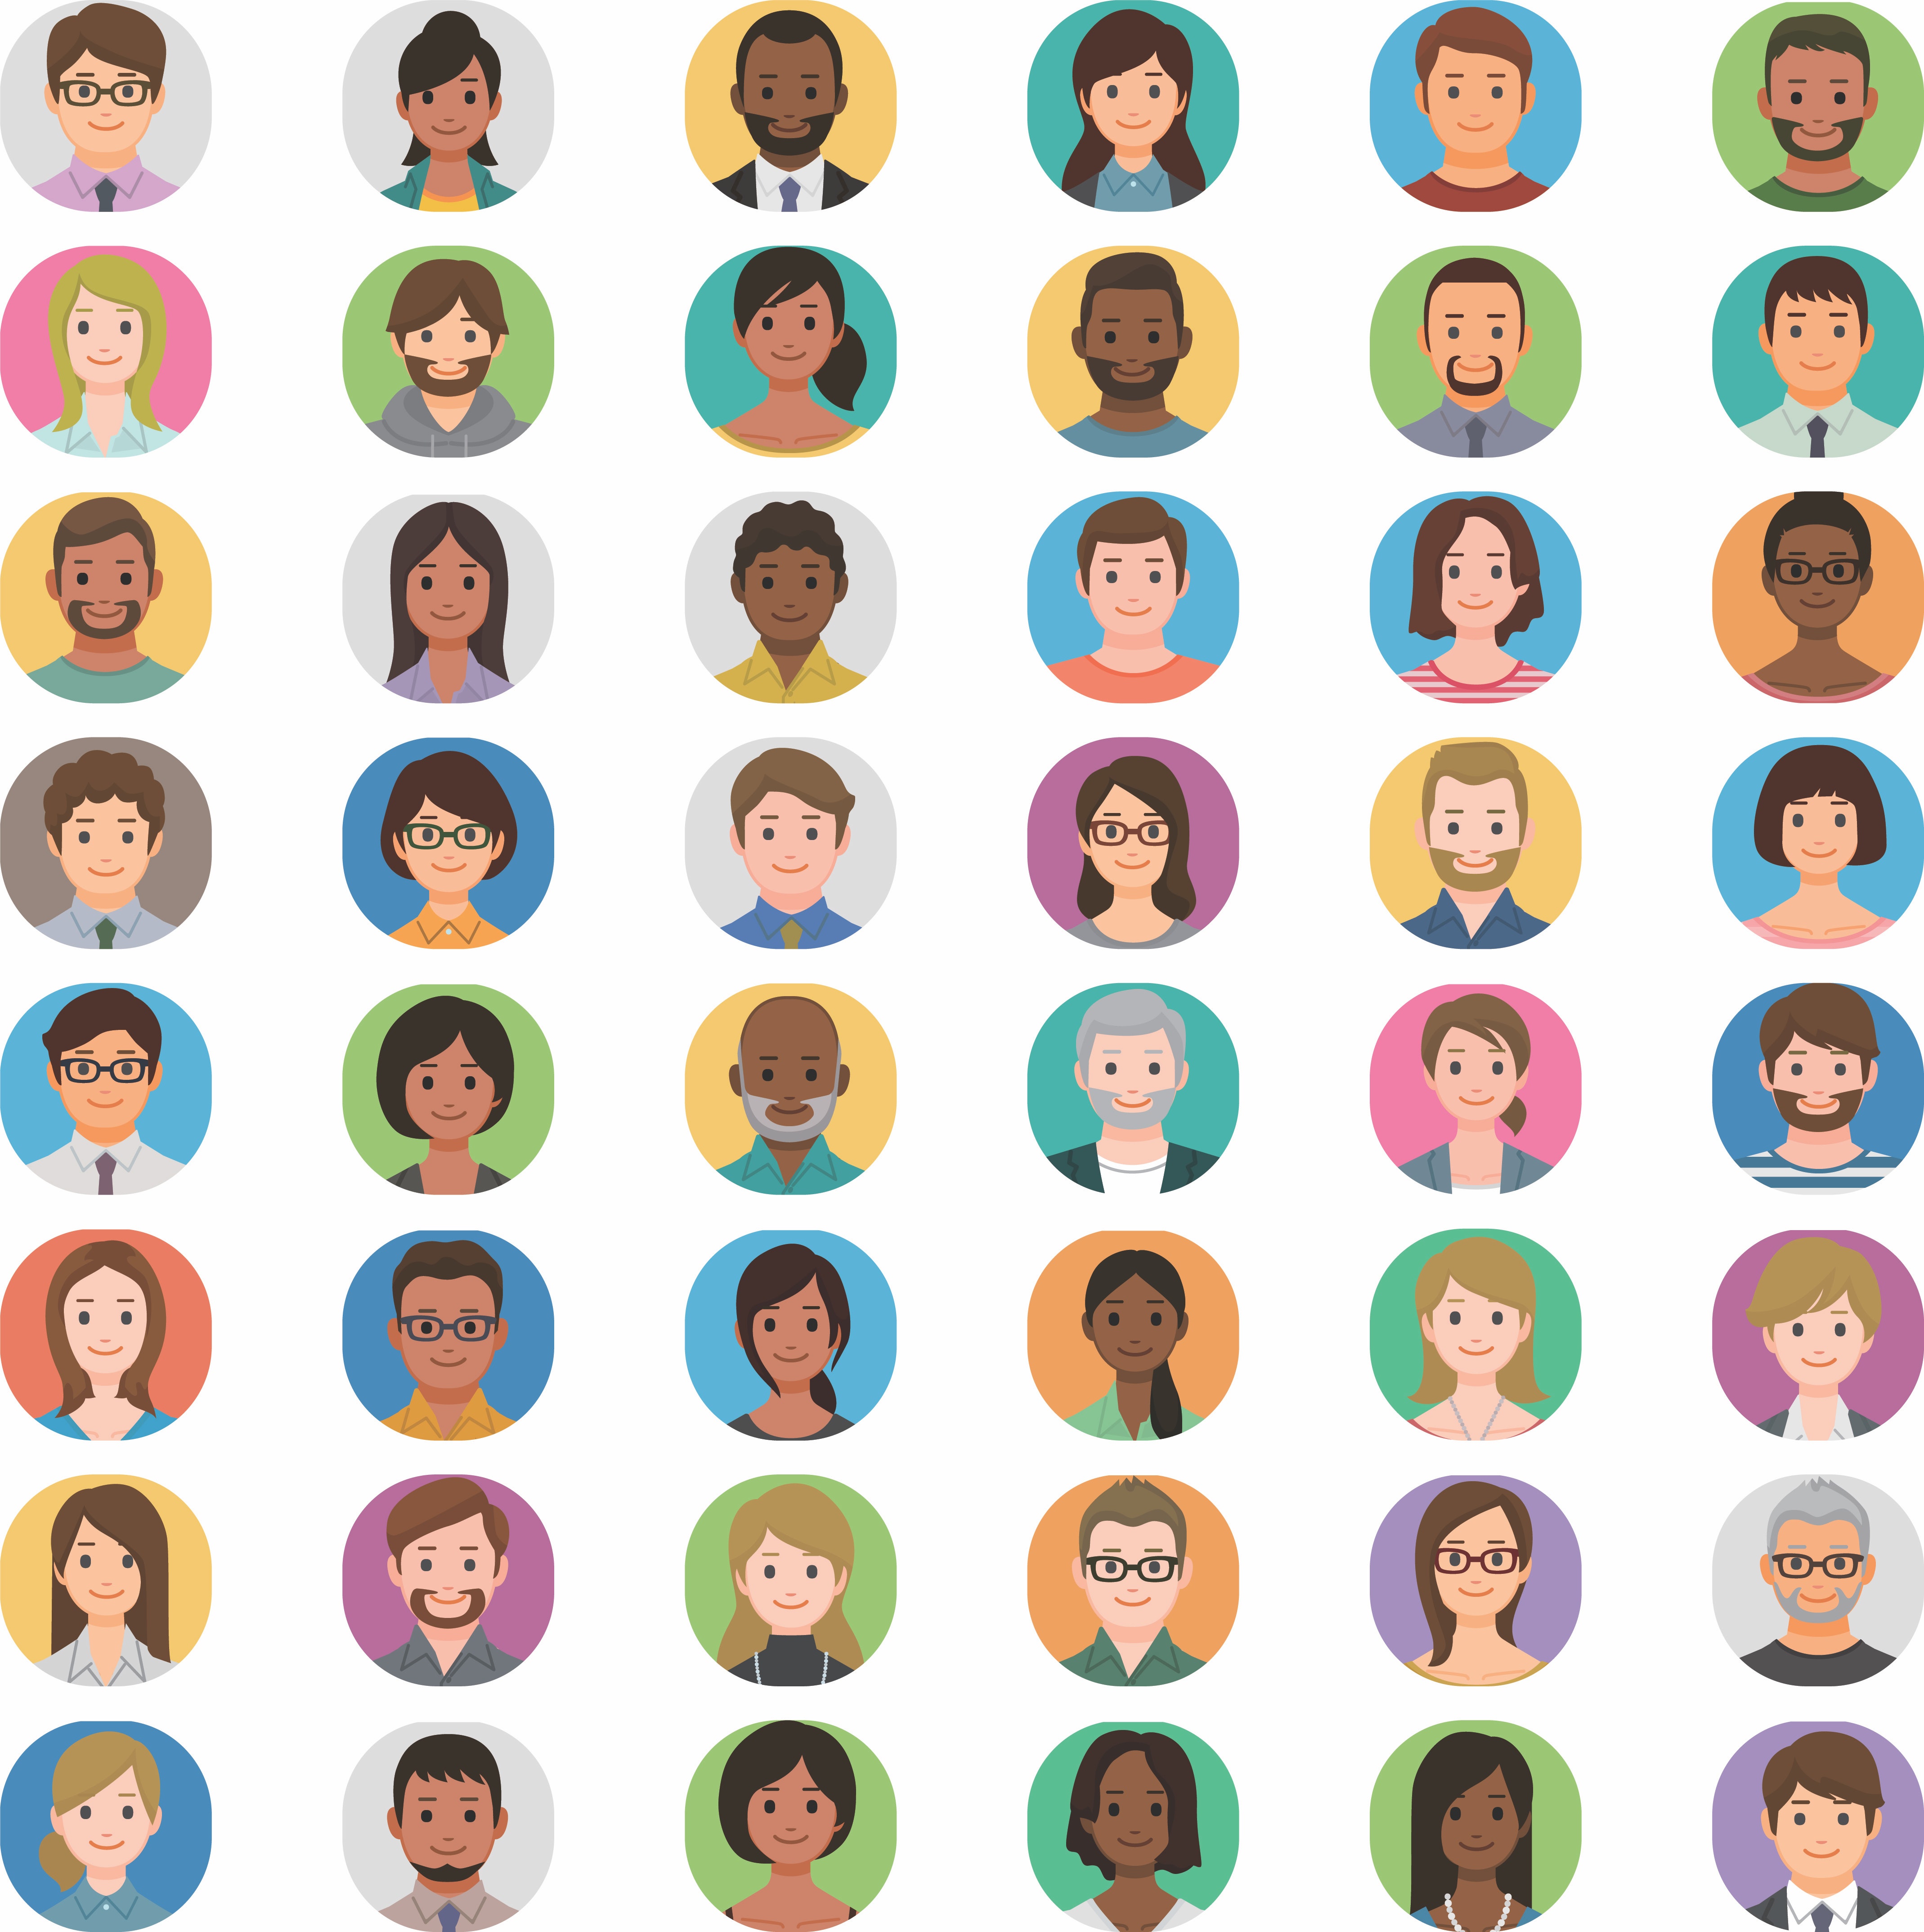 A 6 x 8 grid of cartoon faces of people